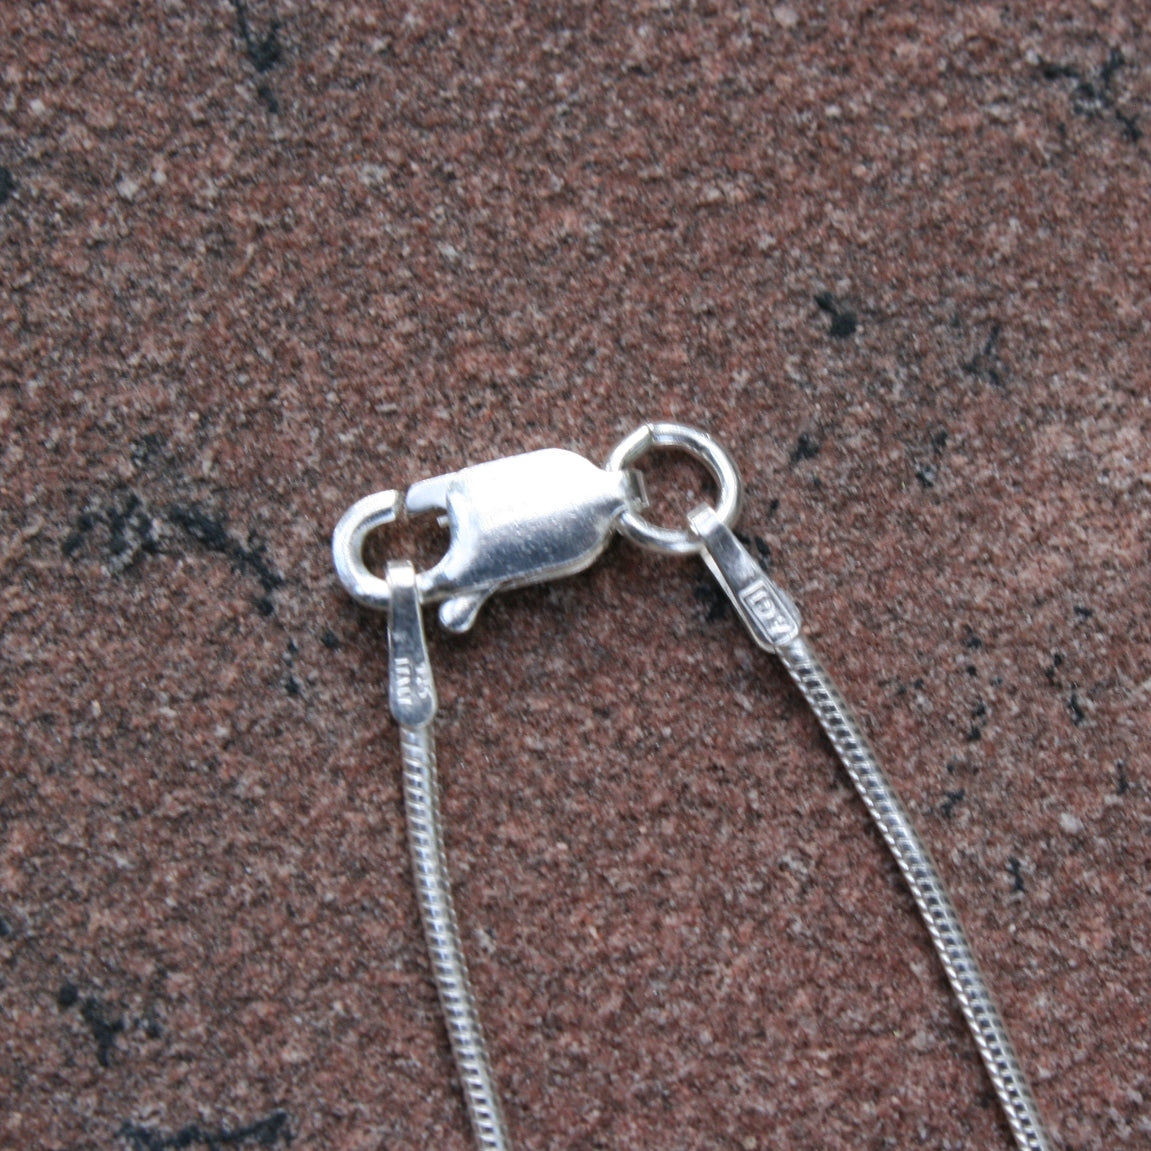 Sterling Silver Snake Chain